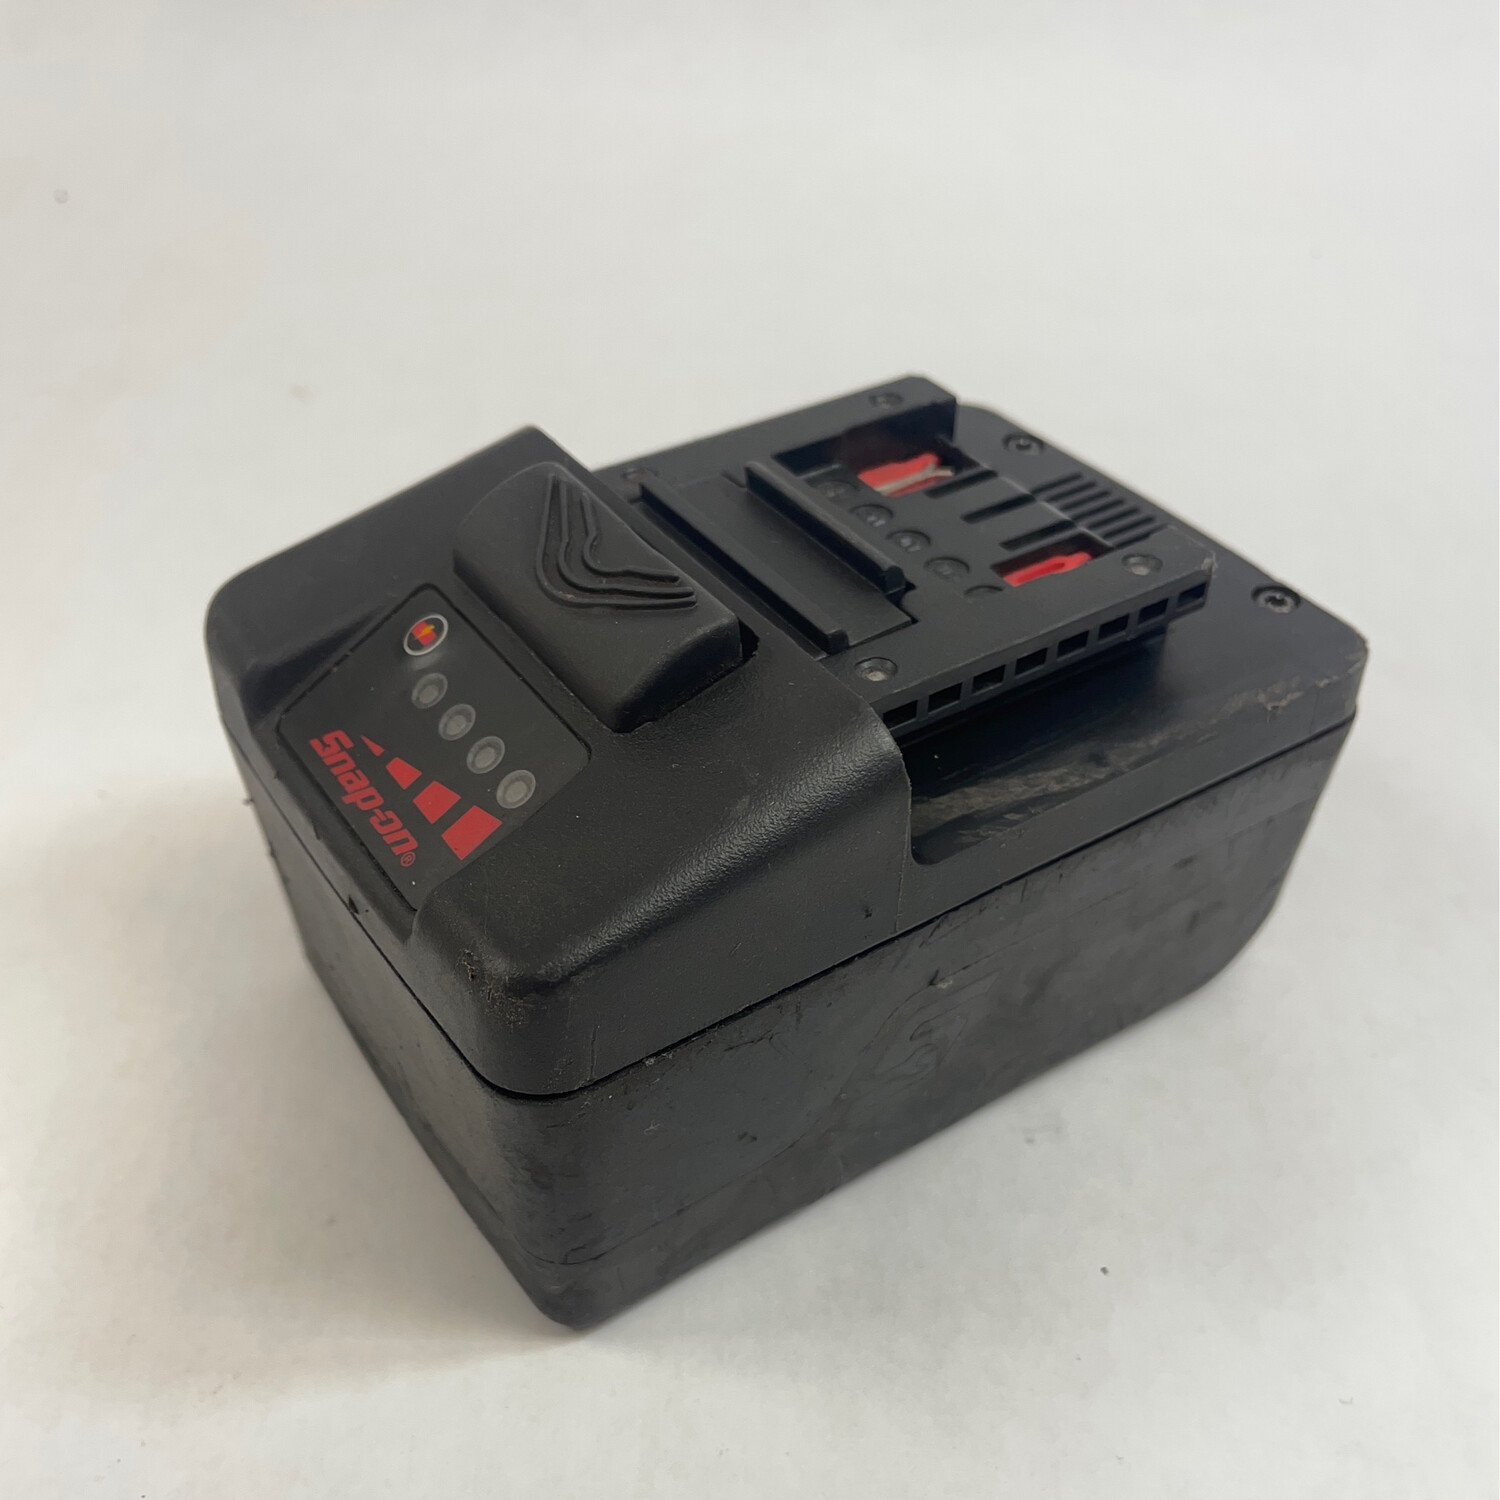 Snap On 18v 5.0Ah Rechargeable Lithium Ion Battery, CTB8187